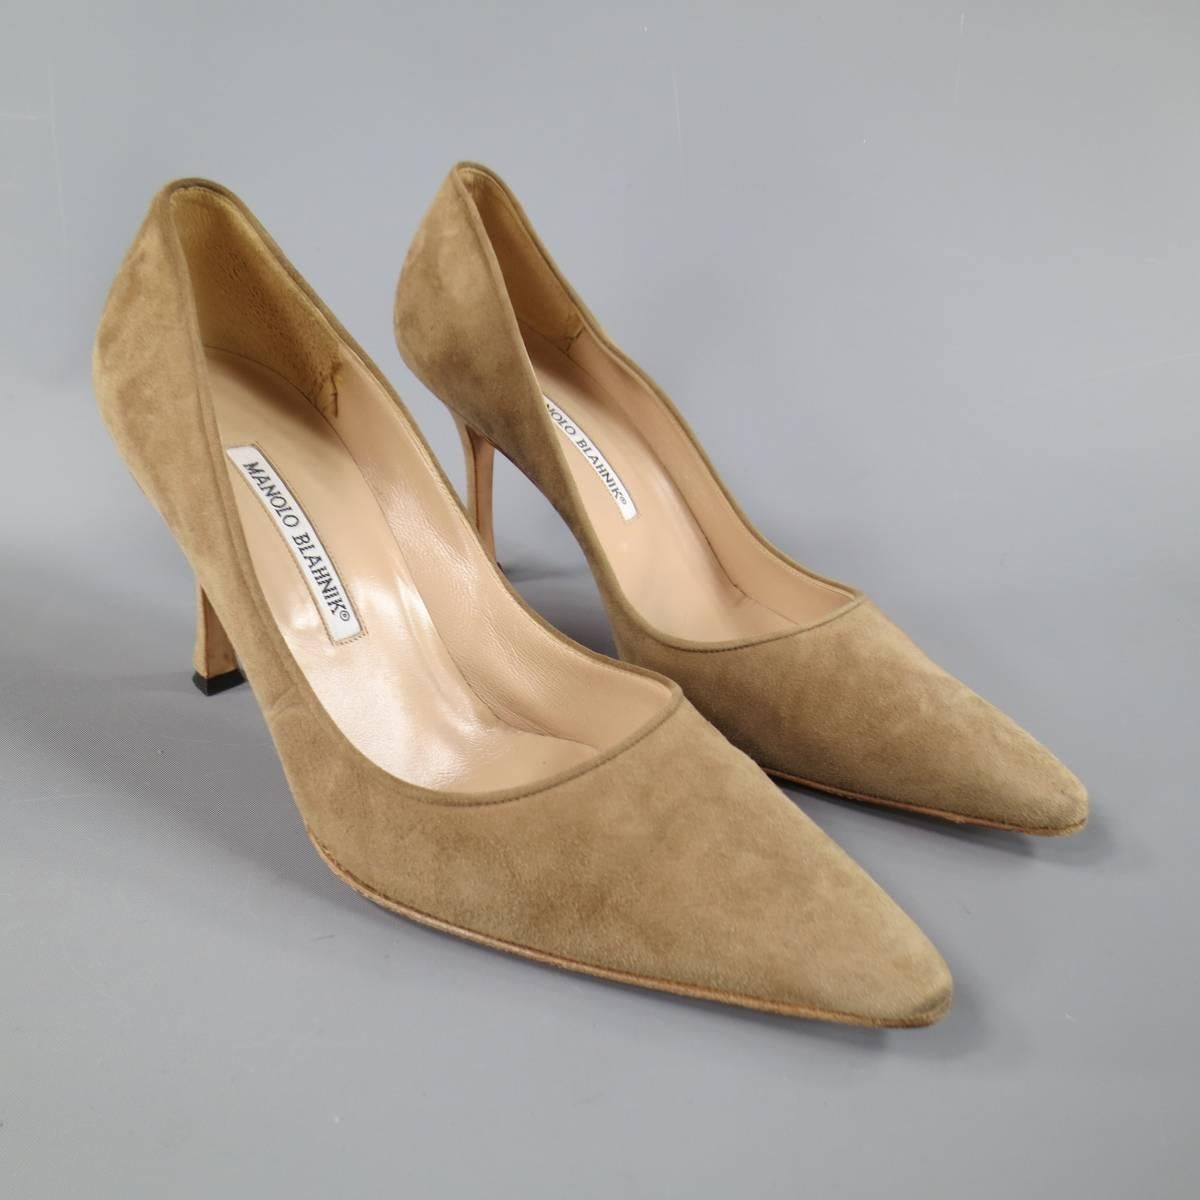 Classic MANOLO BLAHNIK pumps in a taupe suede featuring a pointed toe and covered stiletto heel. Made in Italy.
 
Good Pre-Owned Condition.
Marked: IT 38
 
Heel: 3.5 in.